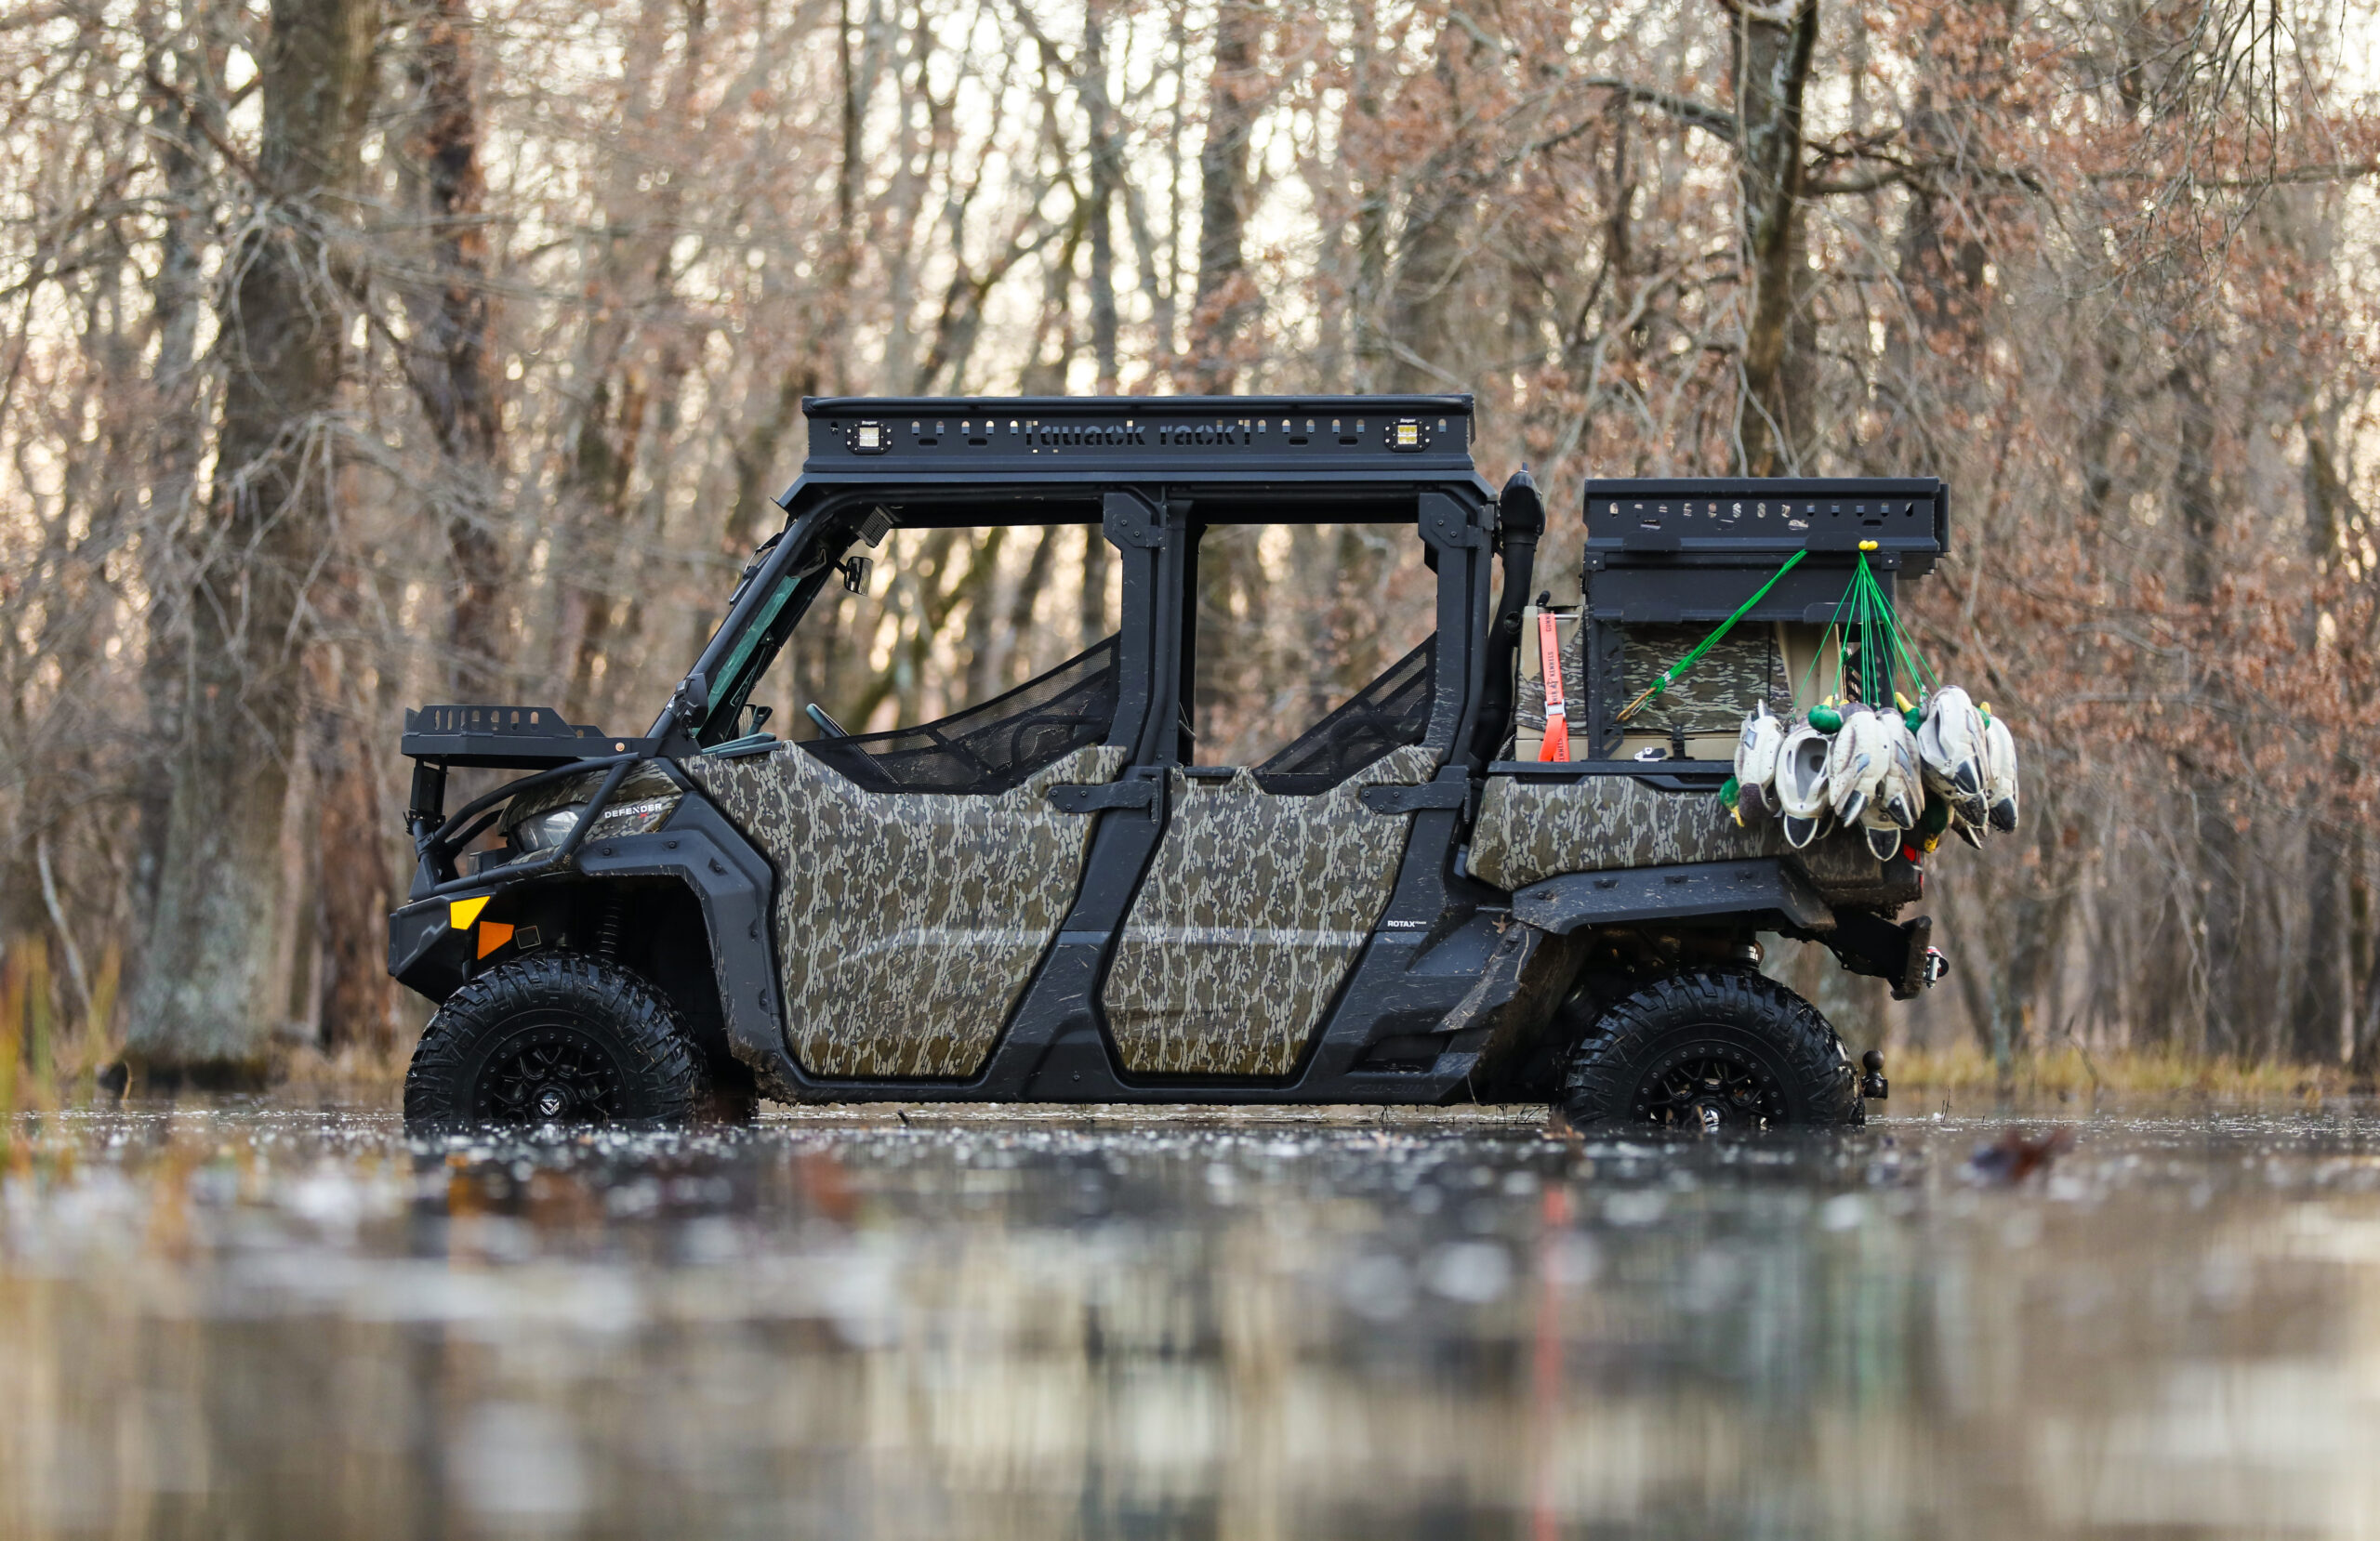 The customized Can-Am Defender.